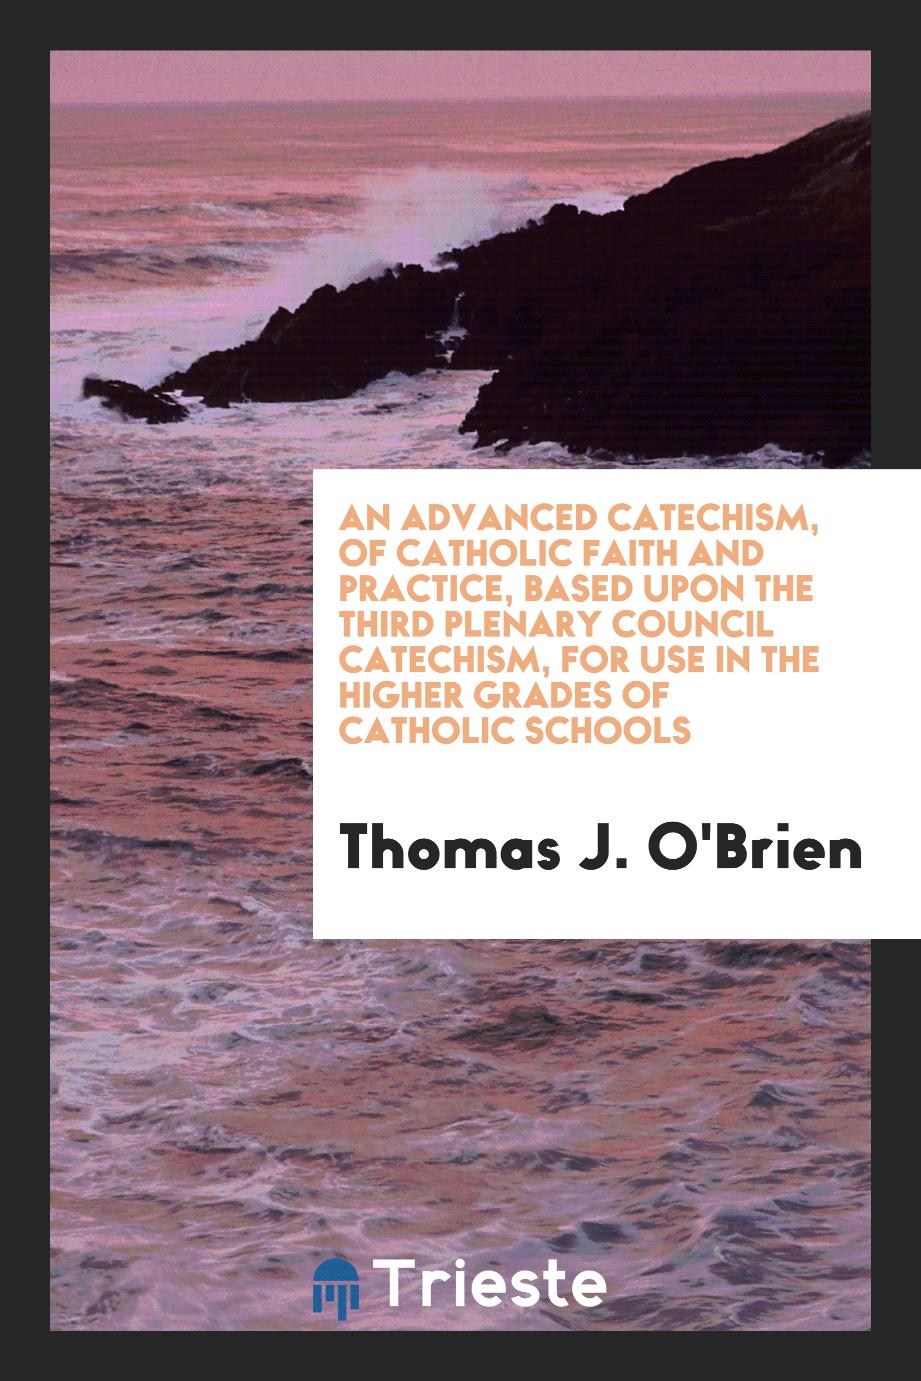 An advanced catechism, of Catholic faith and practice, based upon the third Plenary council catechism, for use in the higher grades of Catholic schools